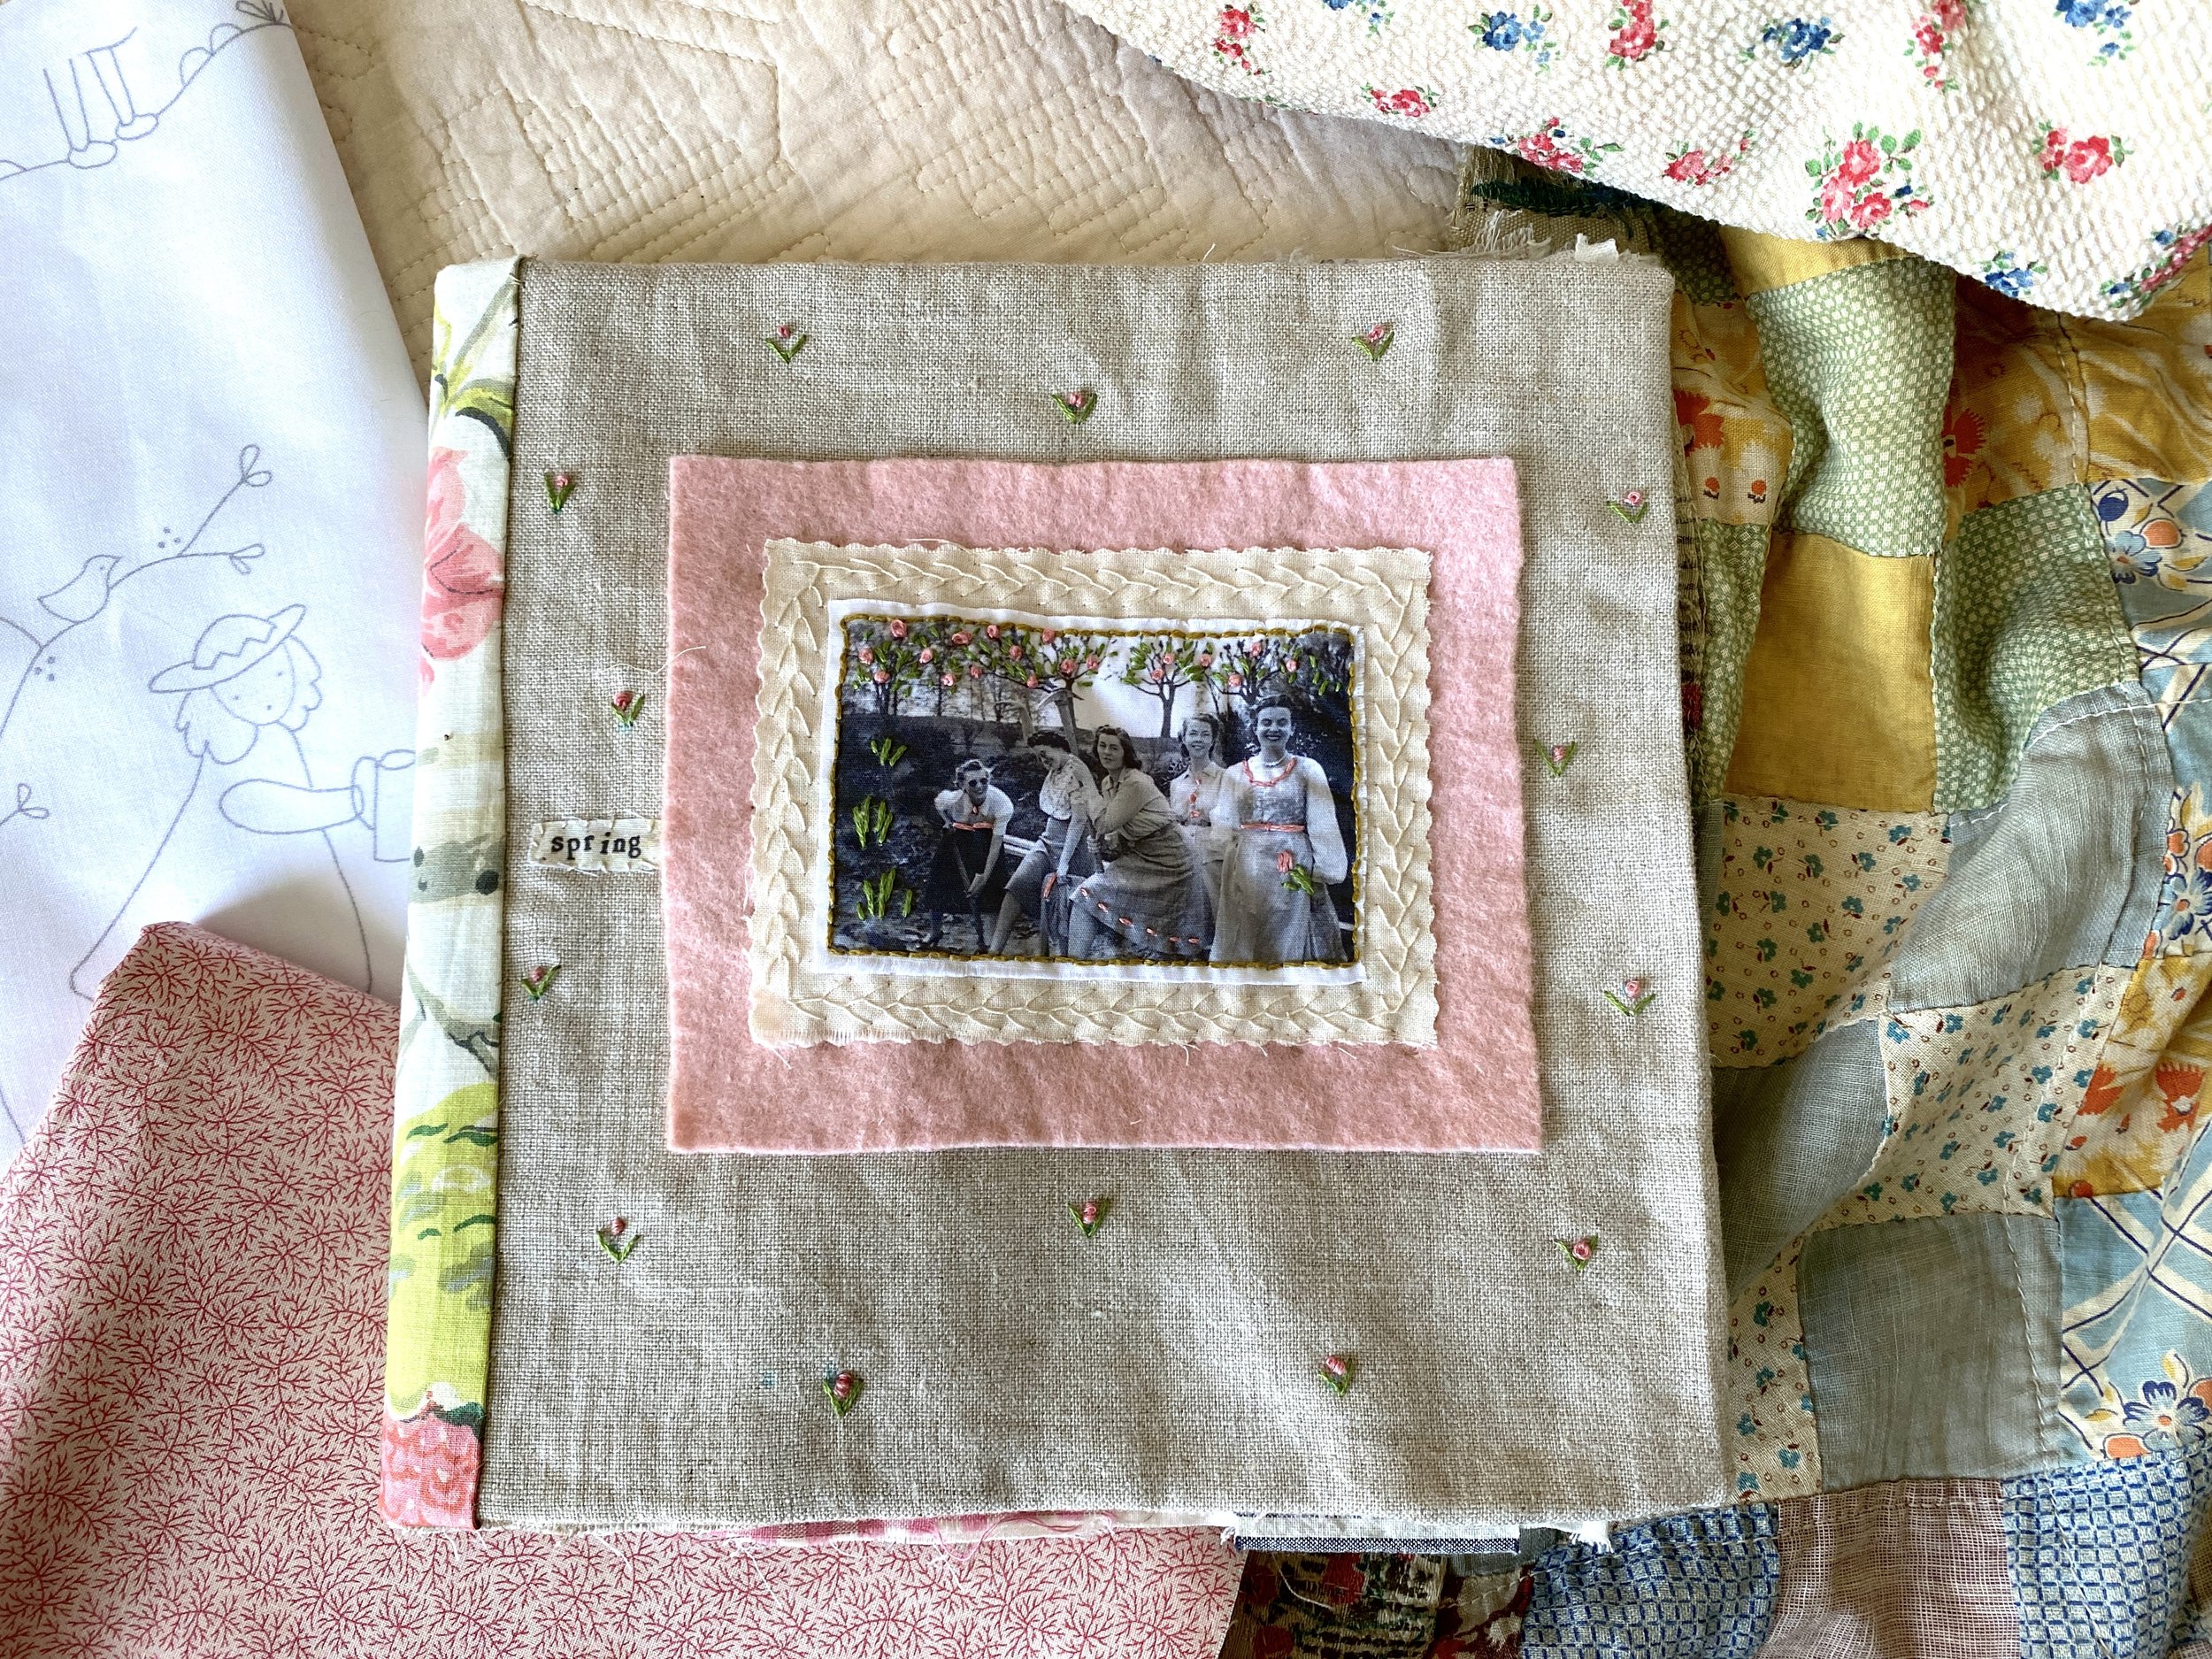 Simple Slow Stitching - Slow Stitch using scrap fabric and simple stitches.  